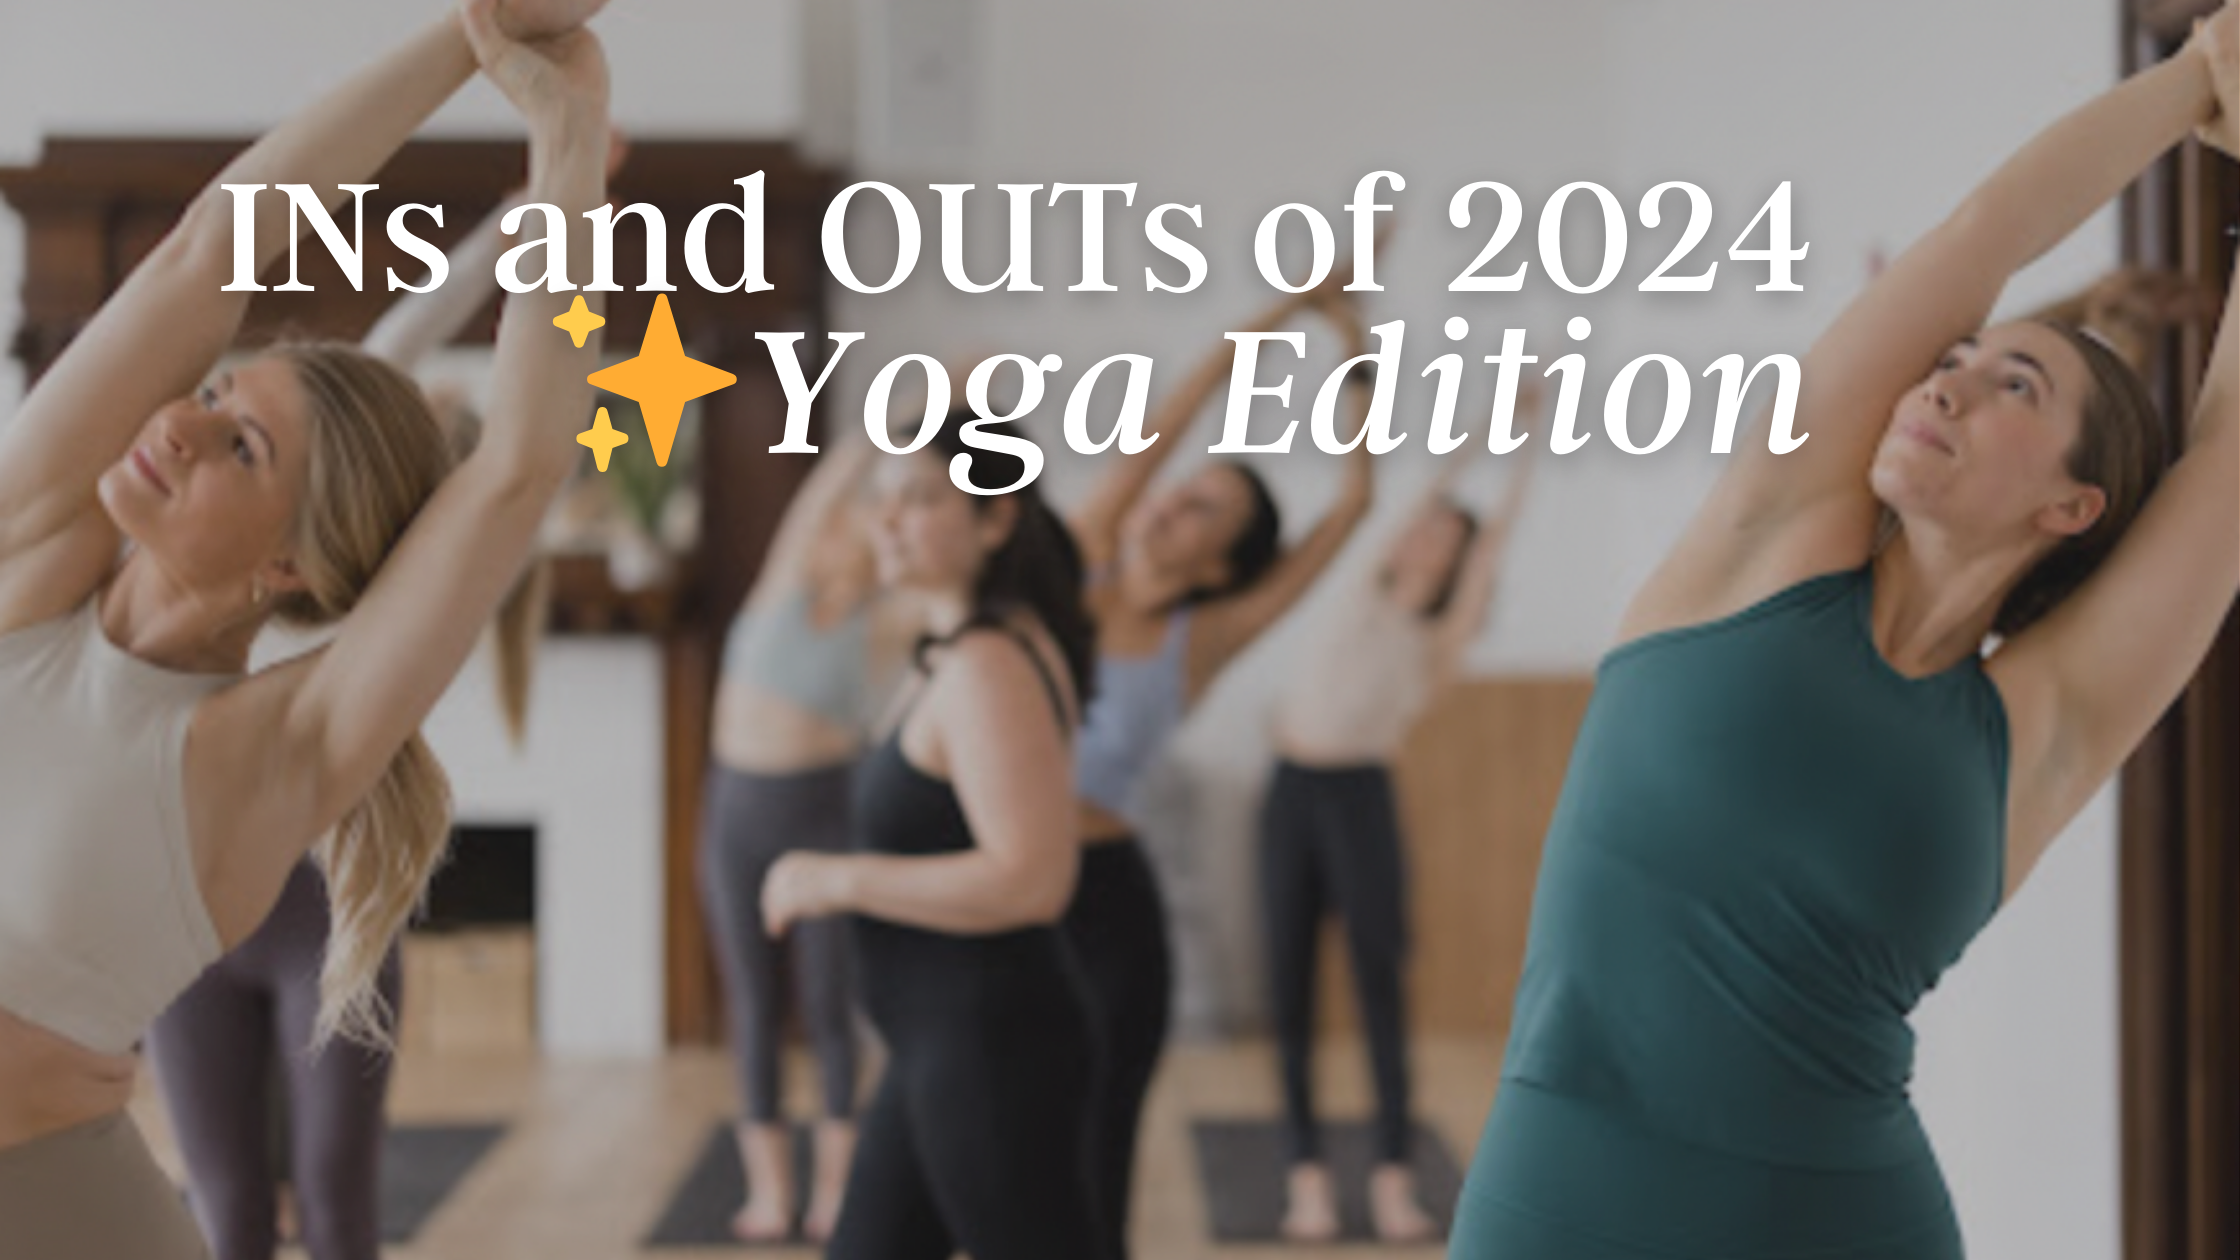 INs and OUTs of 2024: Yoga Edition